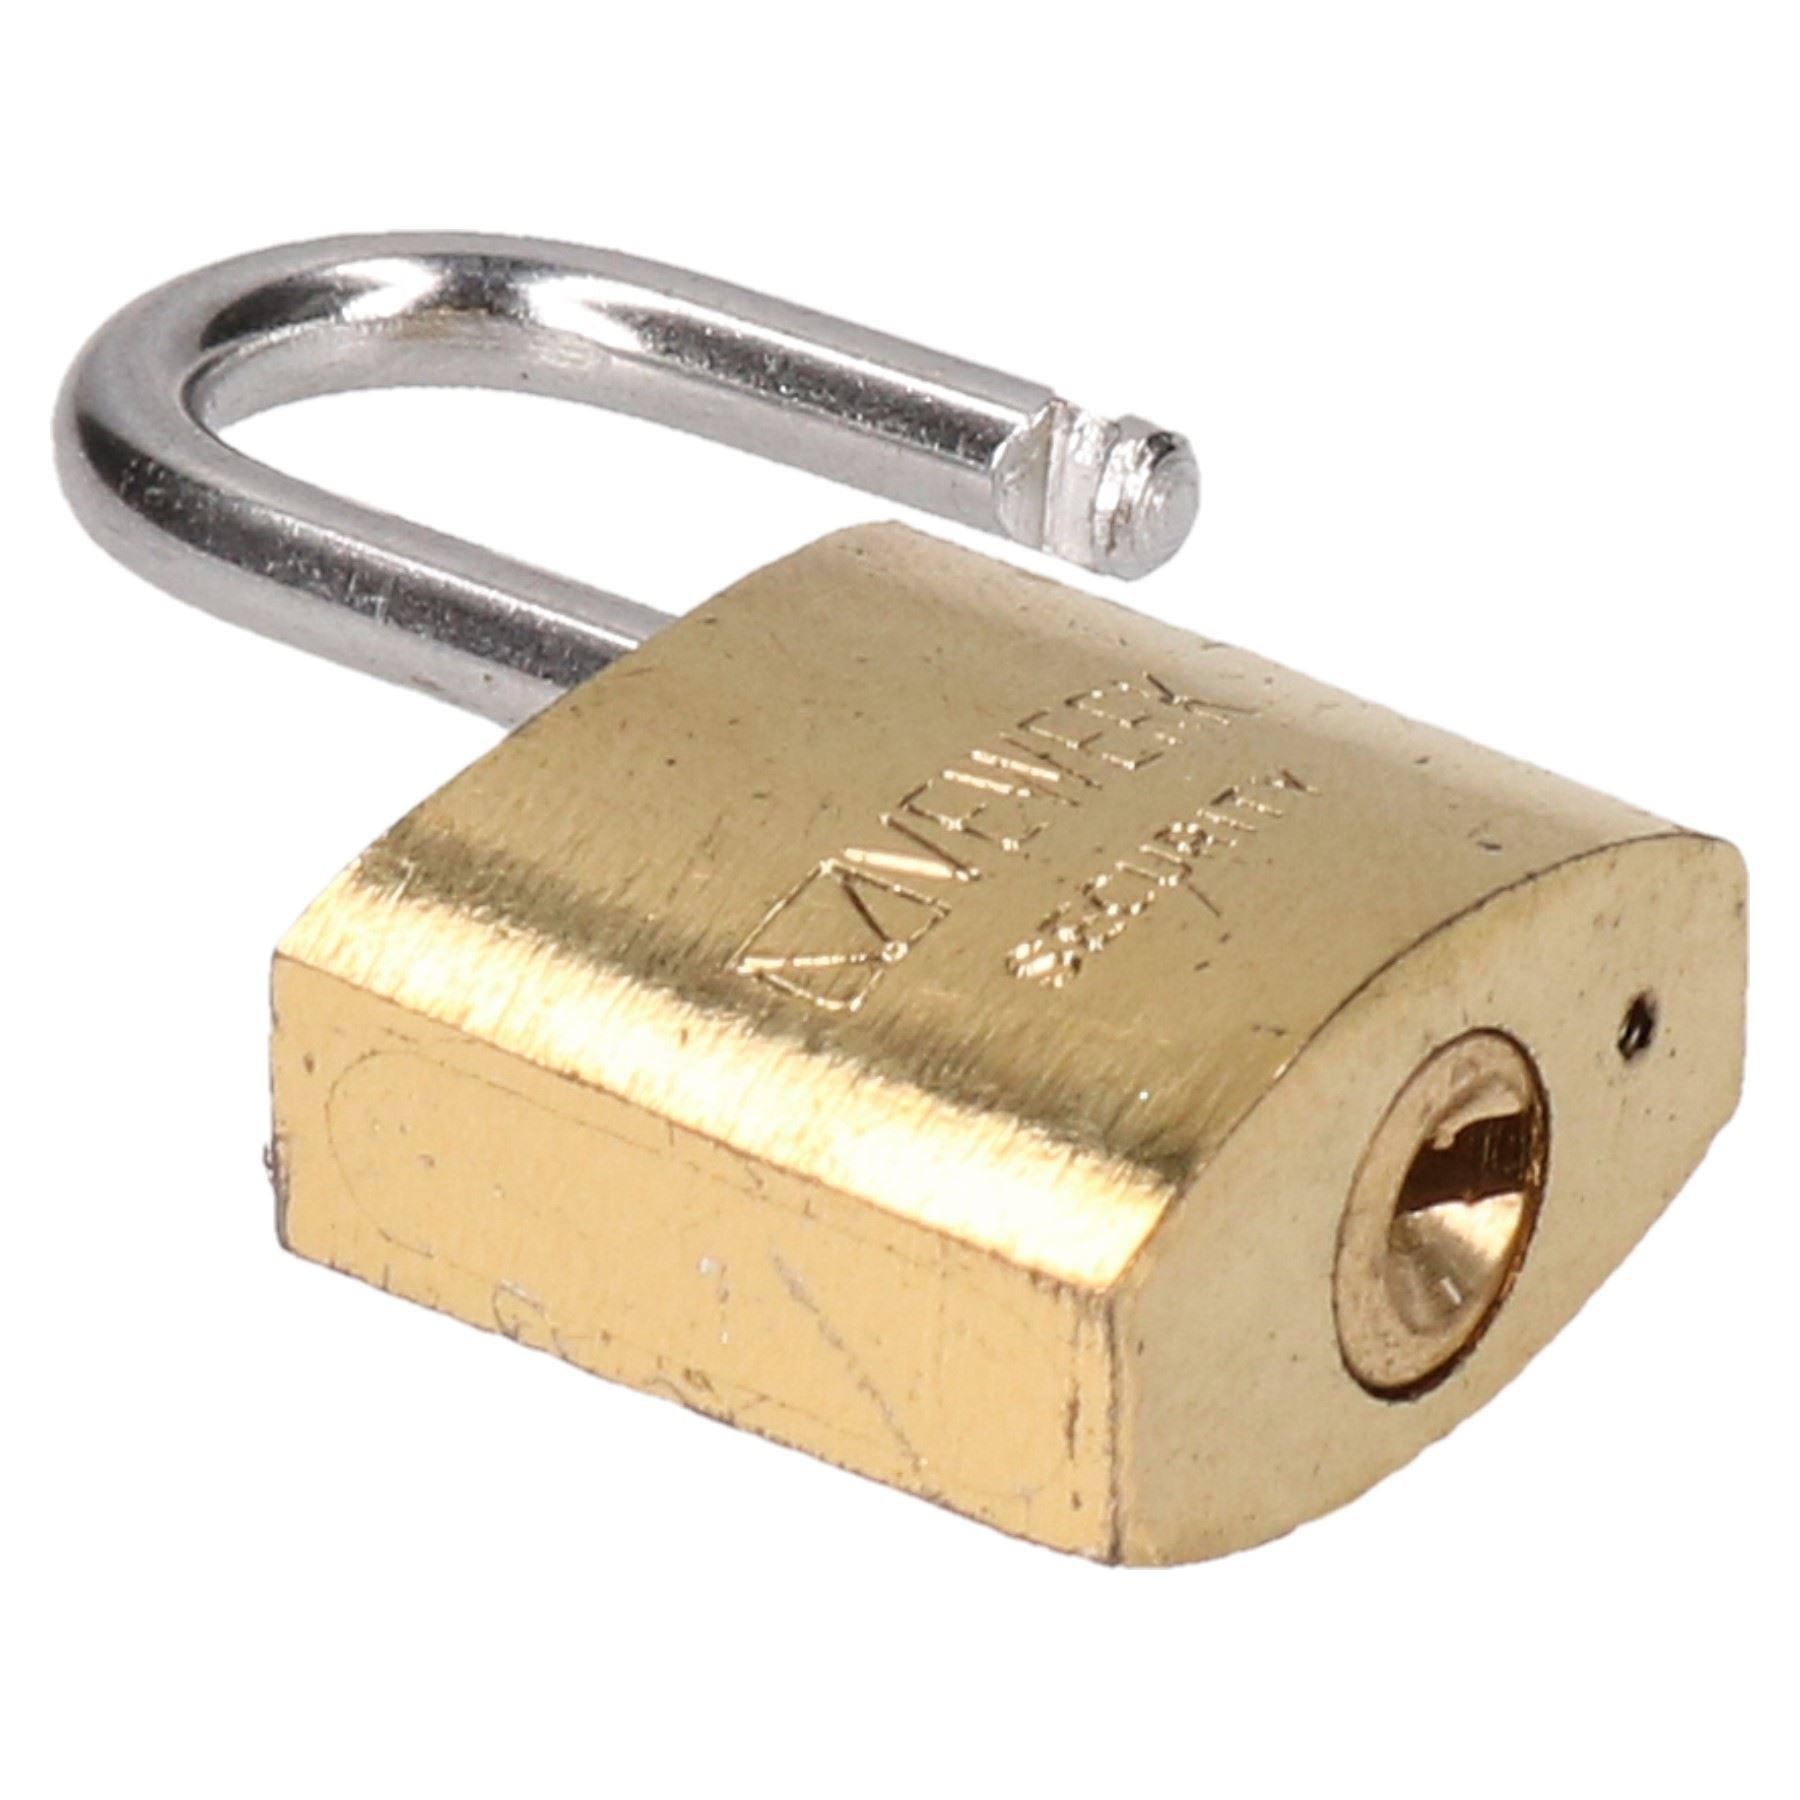 12 x 20mm Shackle Brass Padlock / Security / Lock Gate Door Shed AT002